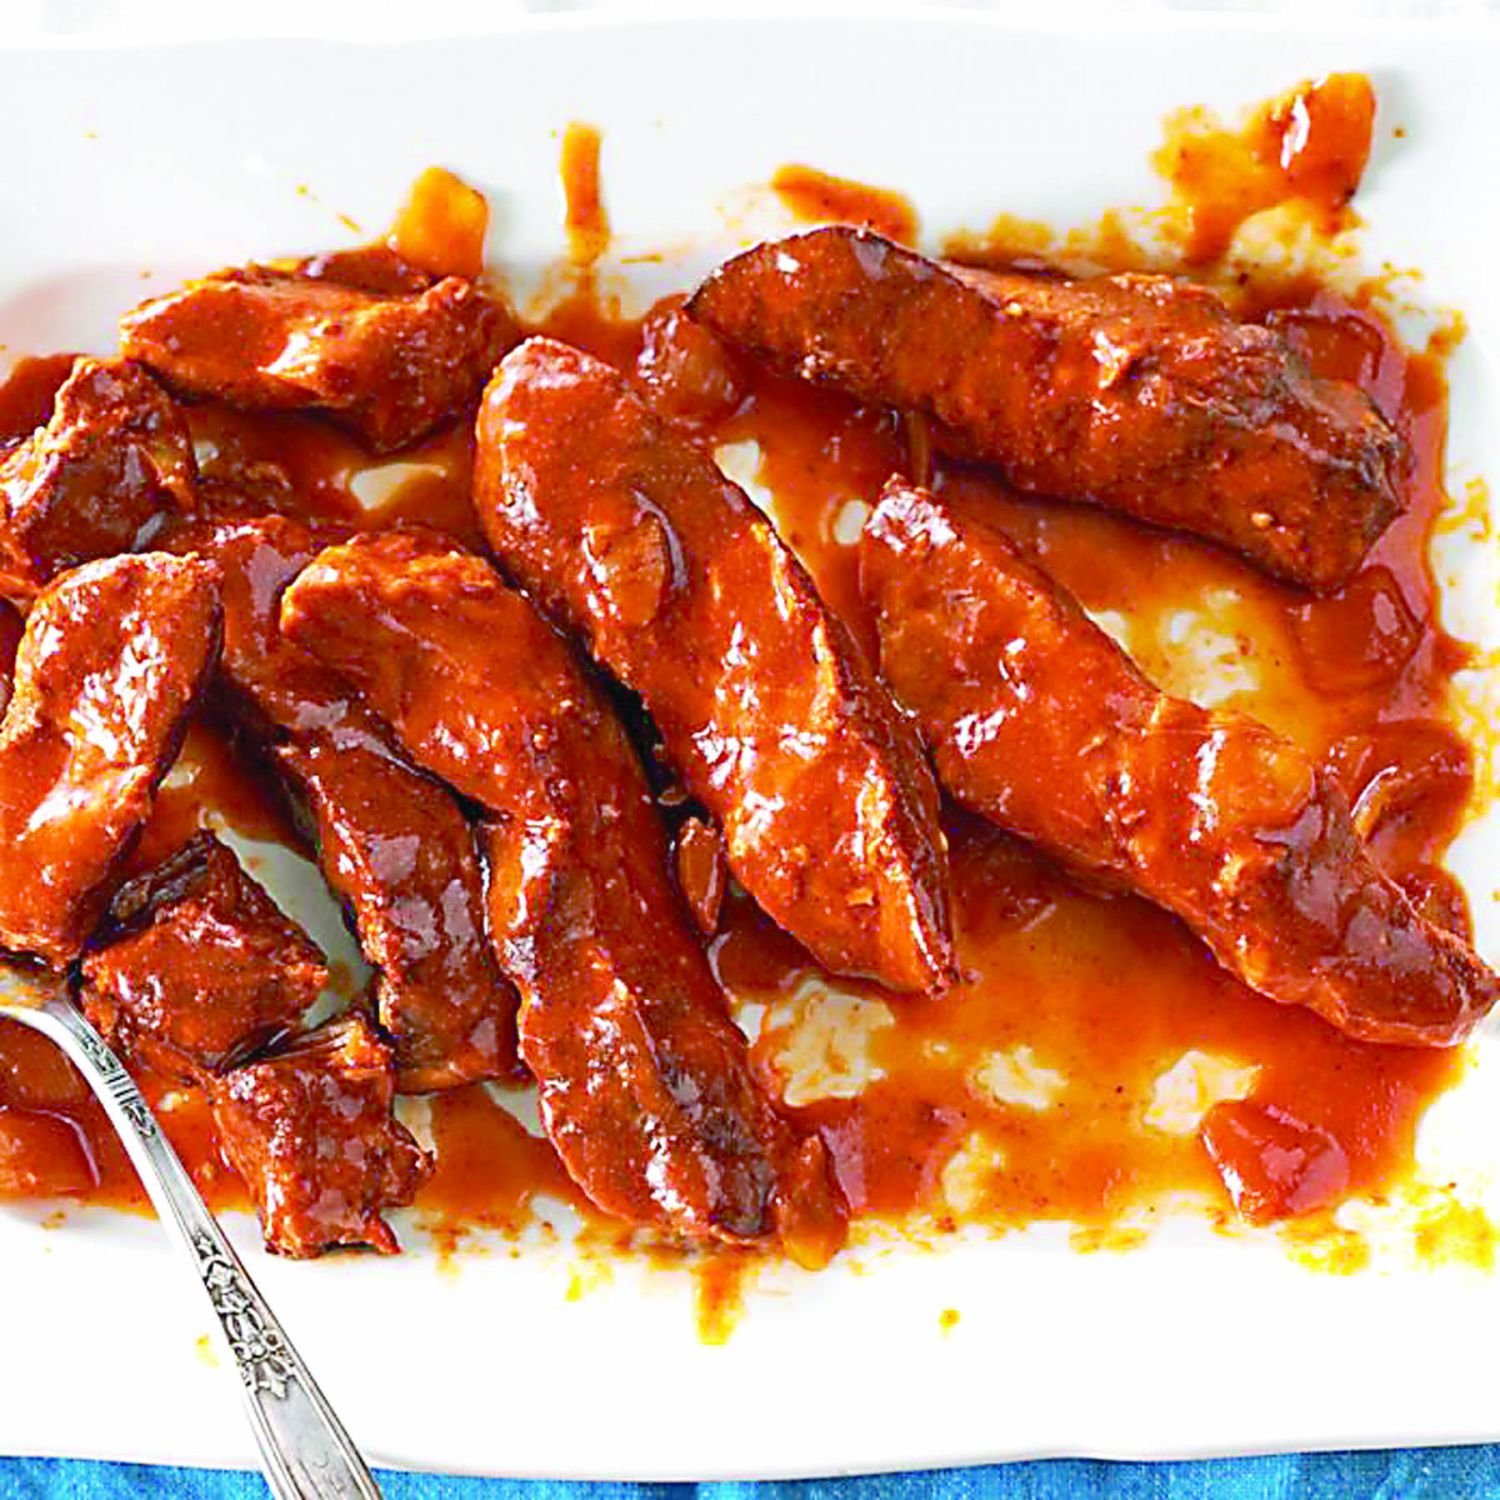 Maple syrup is the surprise ingredient that adds sweetness to the sauce in this slow cooker rib recipe. Local maple sugaring events are scheduled in Bucks County and New Jersey. Photograph from tasteofhome.com.